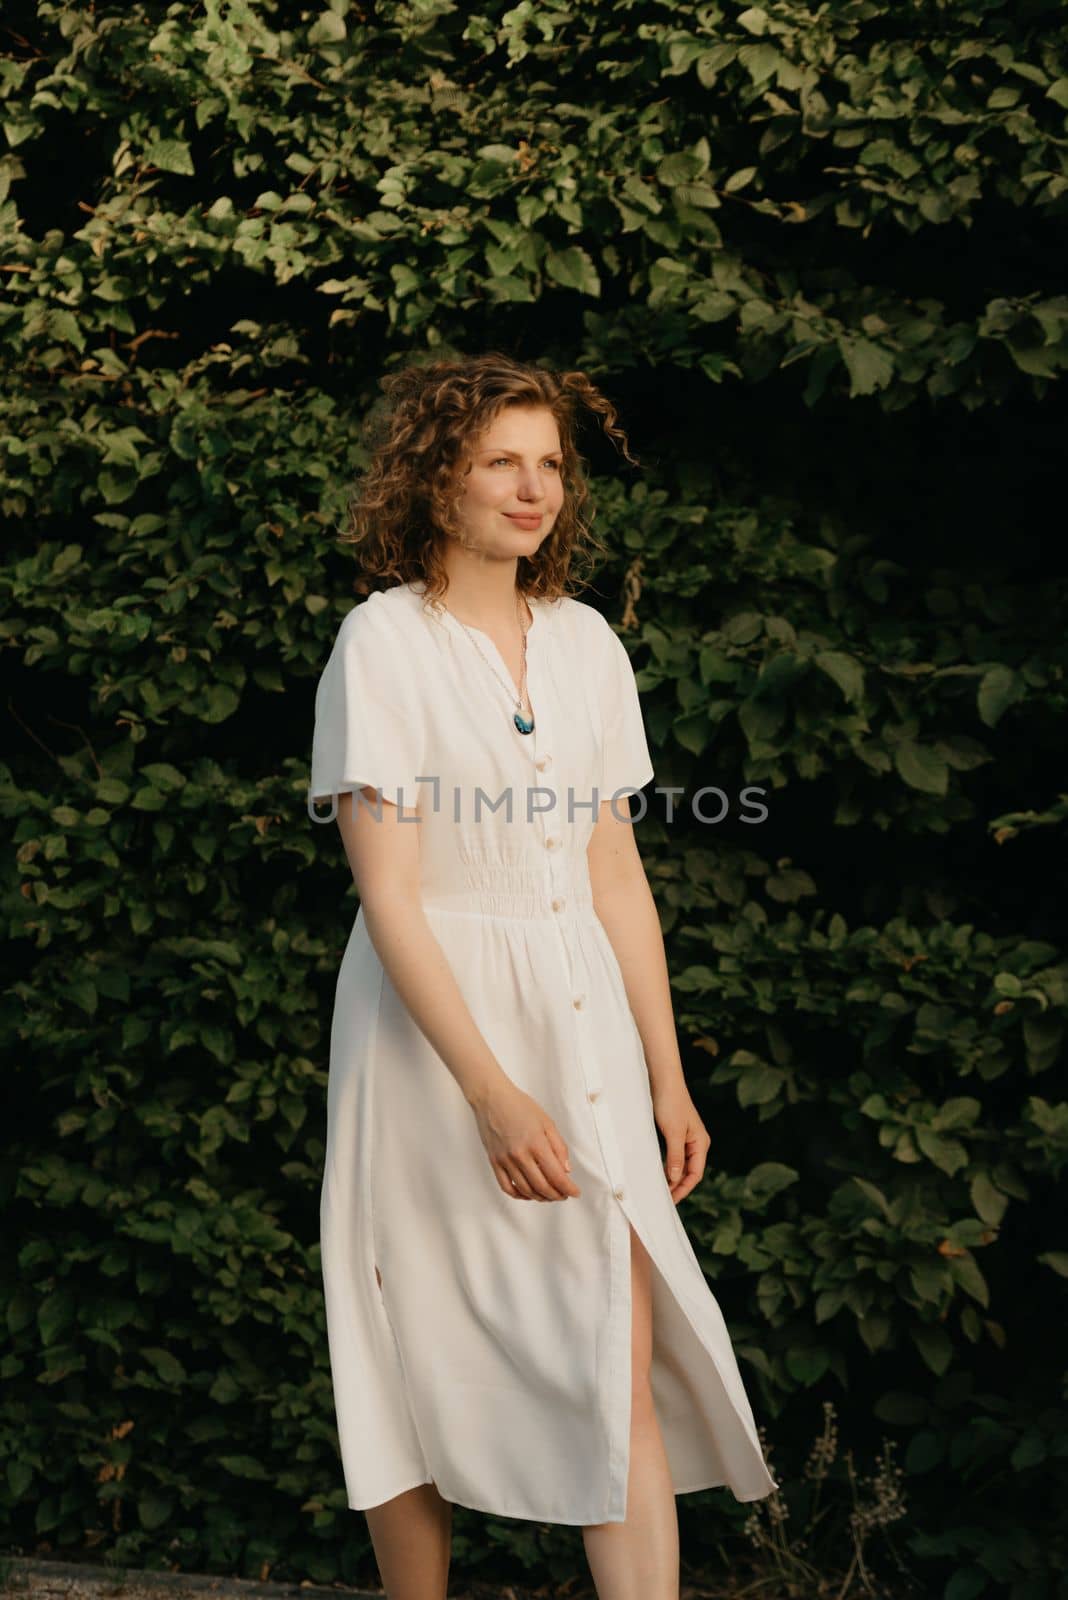 A happy woman with curly hair is posing in the garden in the evening. A lady in a white dress with green leaves in the background.